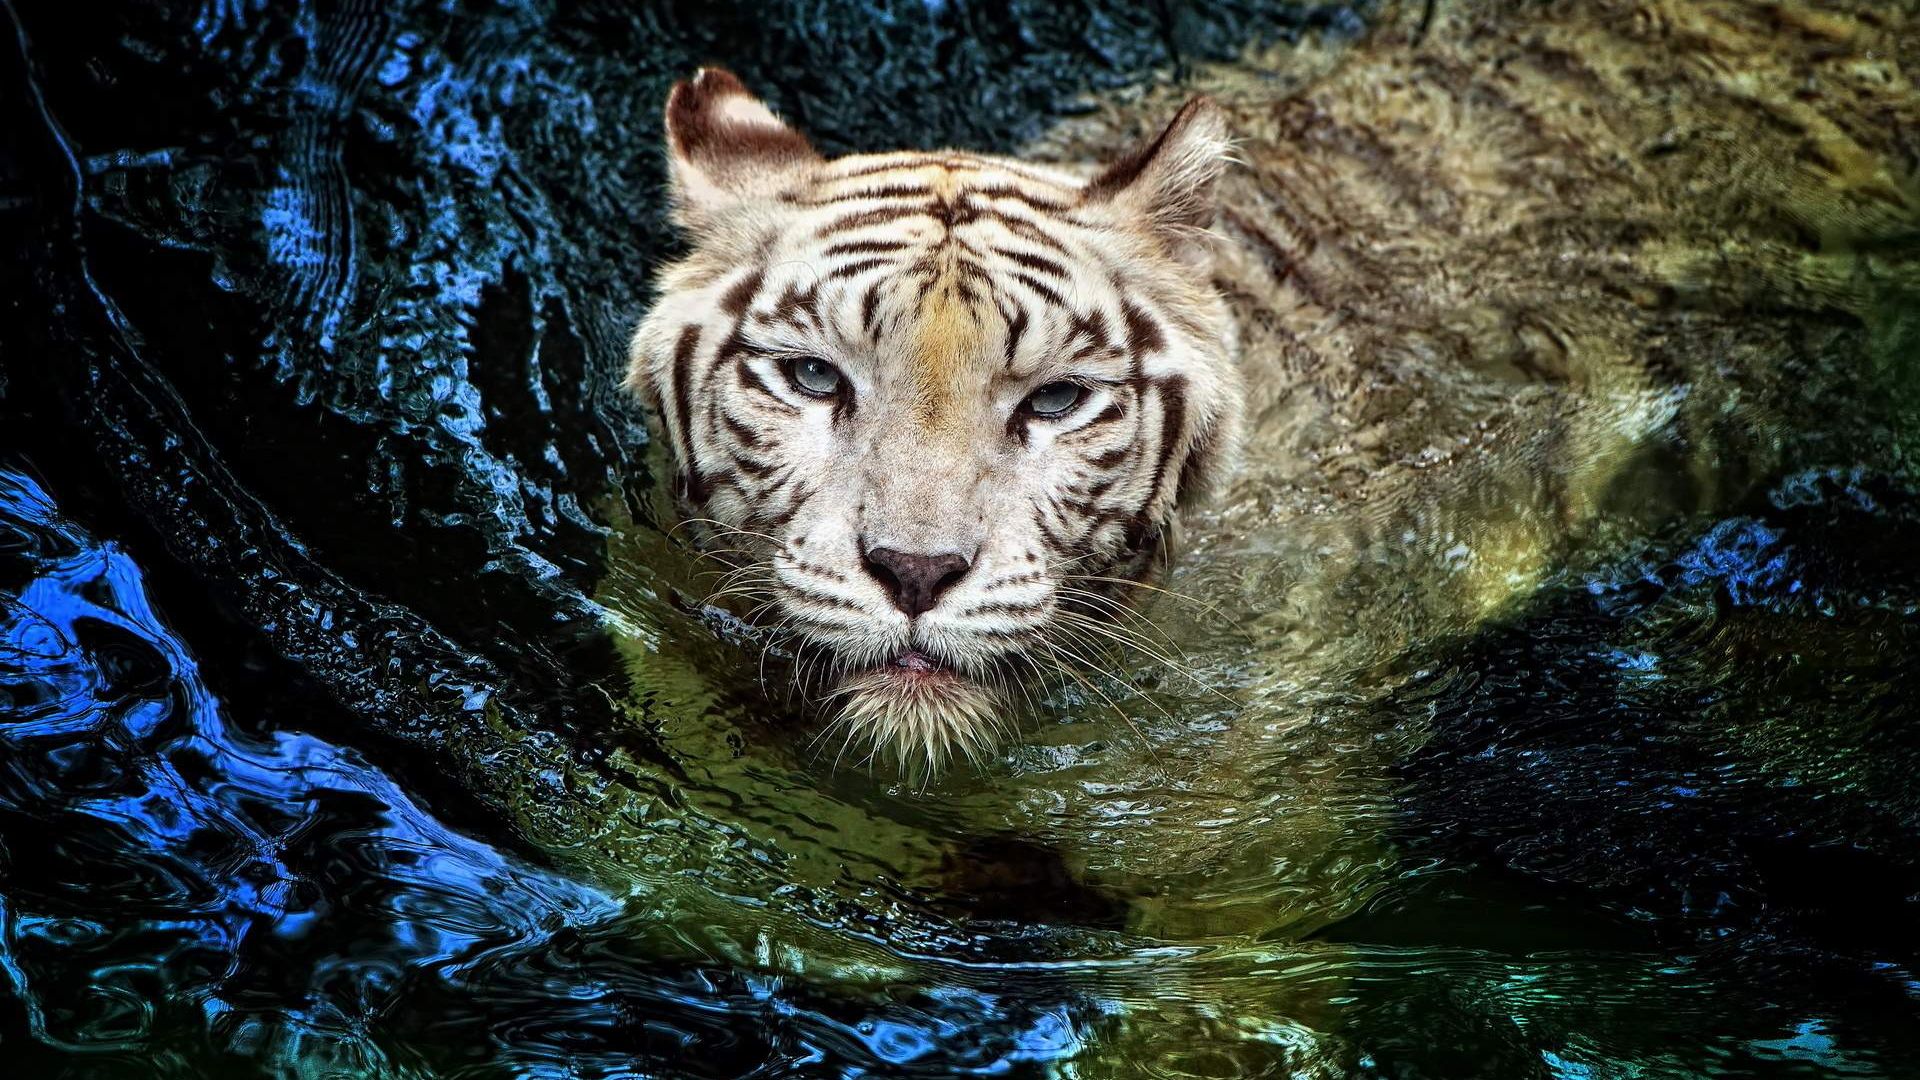 Wallpaper Tiger is swimming